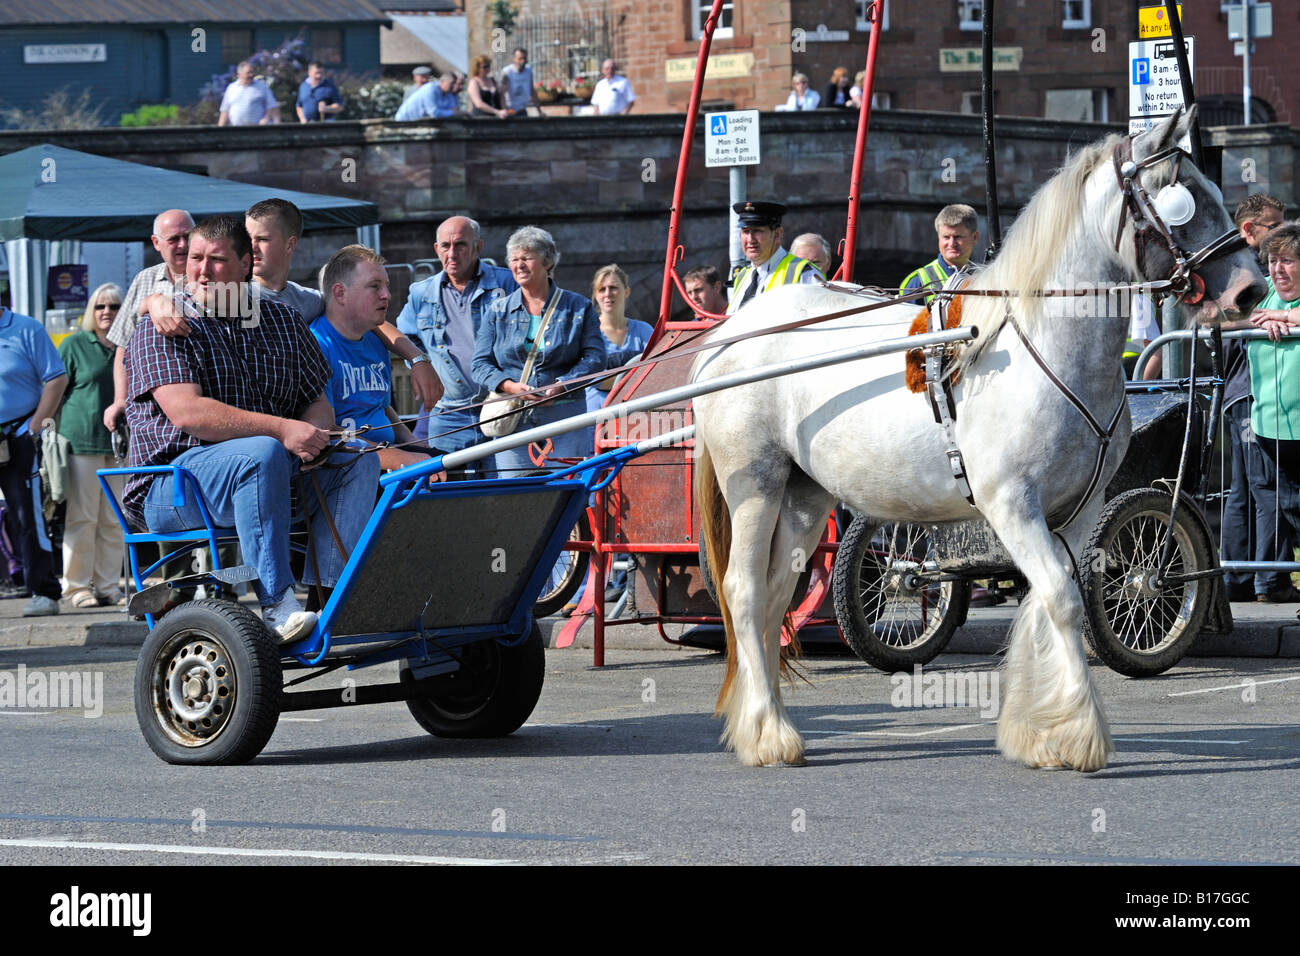 Gypsy travellers with horse and trap. Appleby Horse Fair. Appleby-in-Westmorland, Cumbria, England, United Kingdom, Europe. Stock Photo